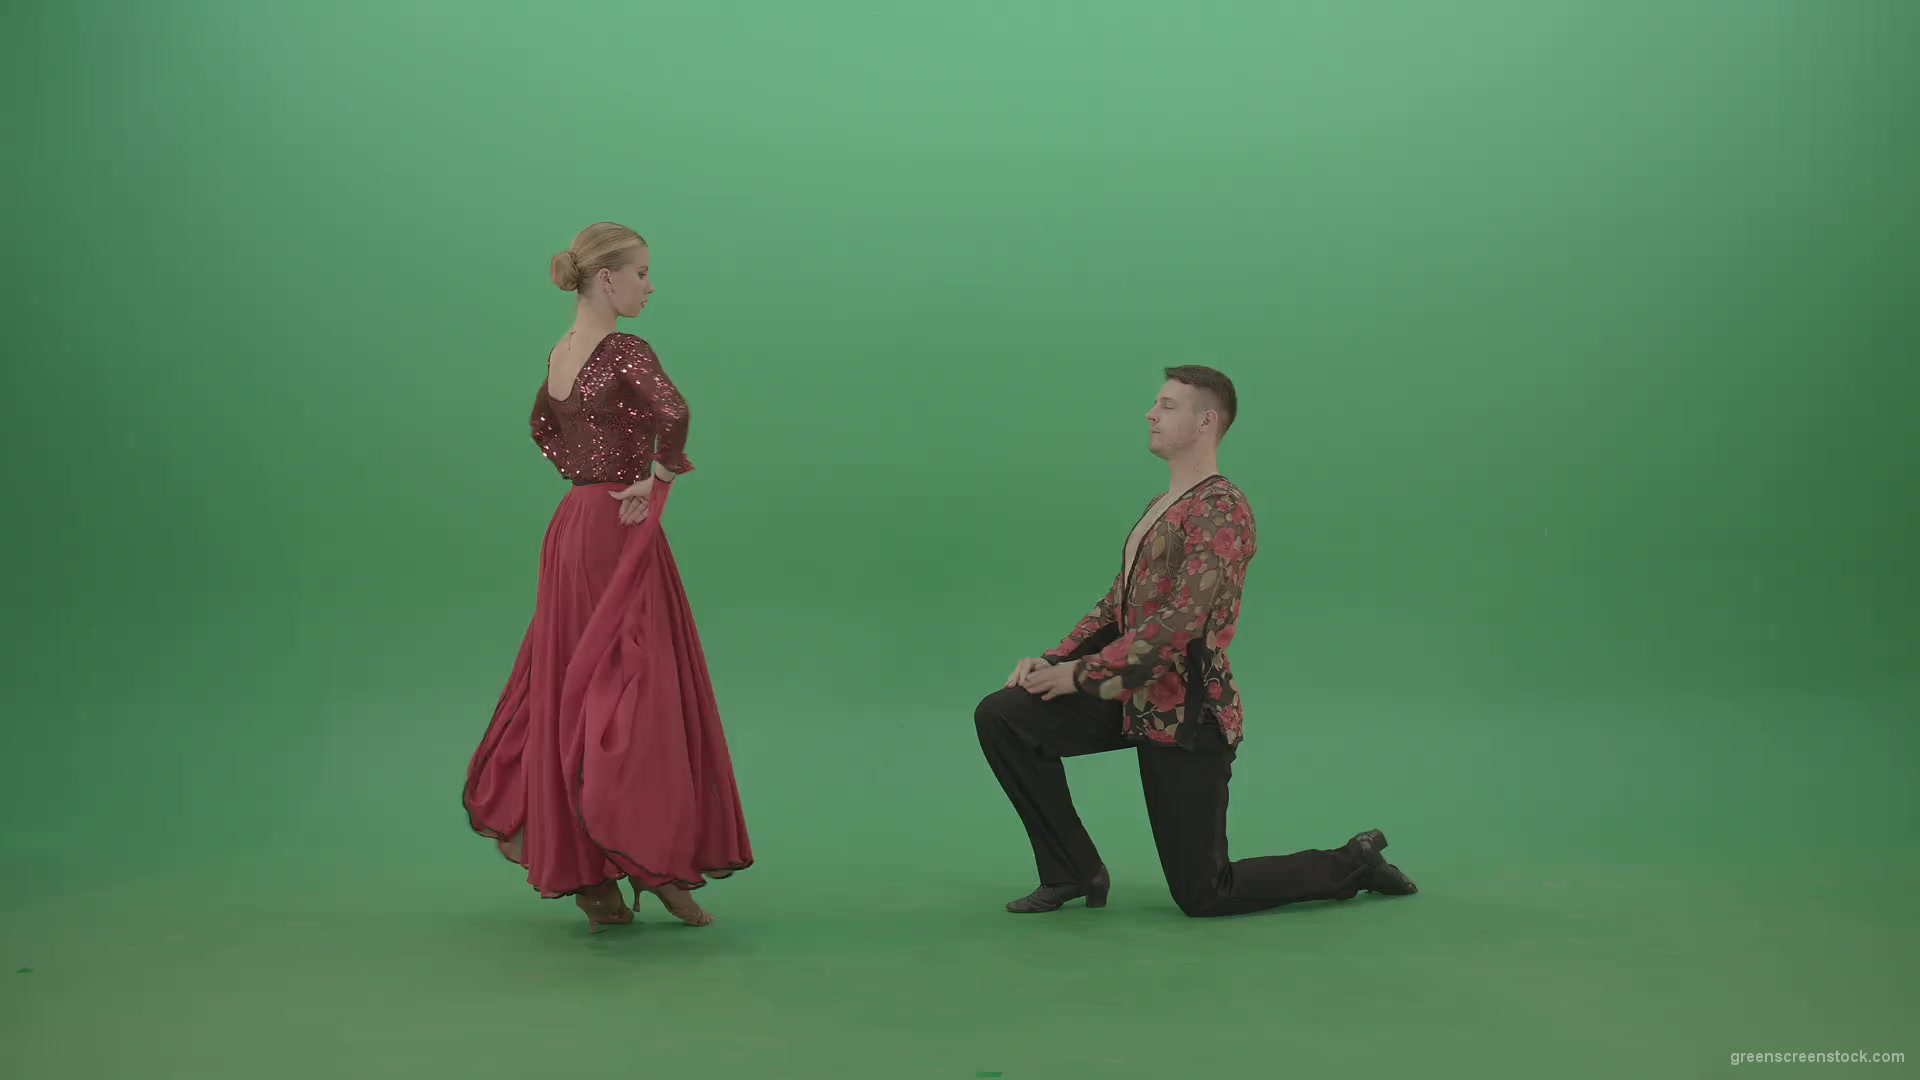 Passion-Couple-dancing-Rumba-Ballroom-dance-and-clapping-in-hands-isolated-on-green-screen-4K-Video-Footage-1920_001 Green Screen Stock